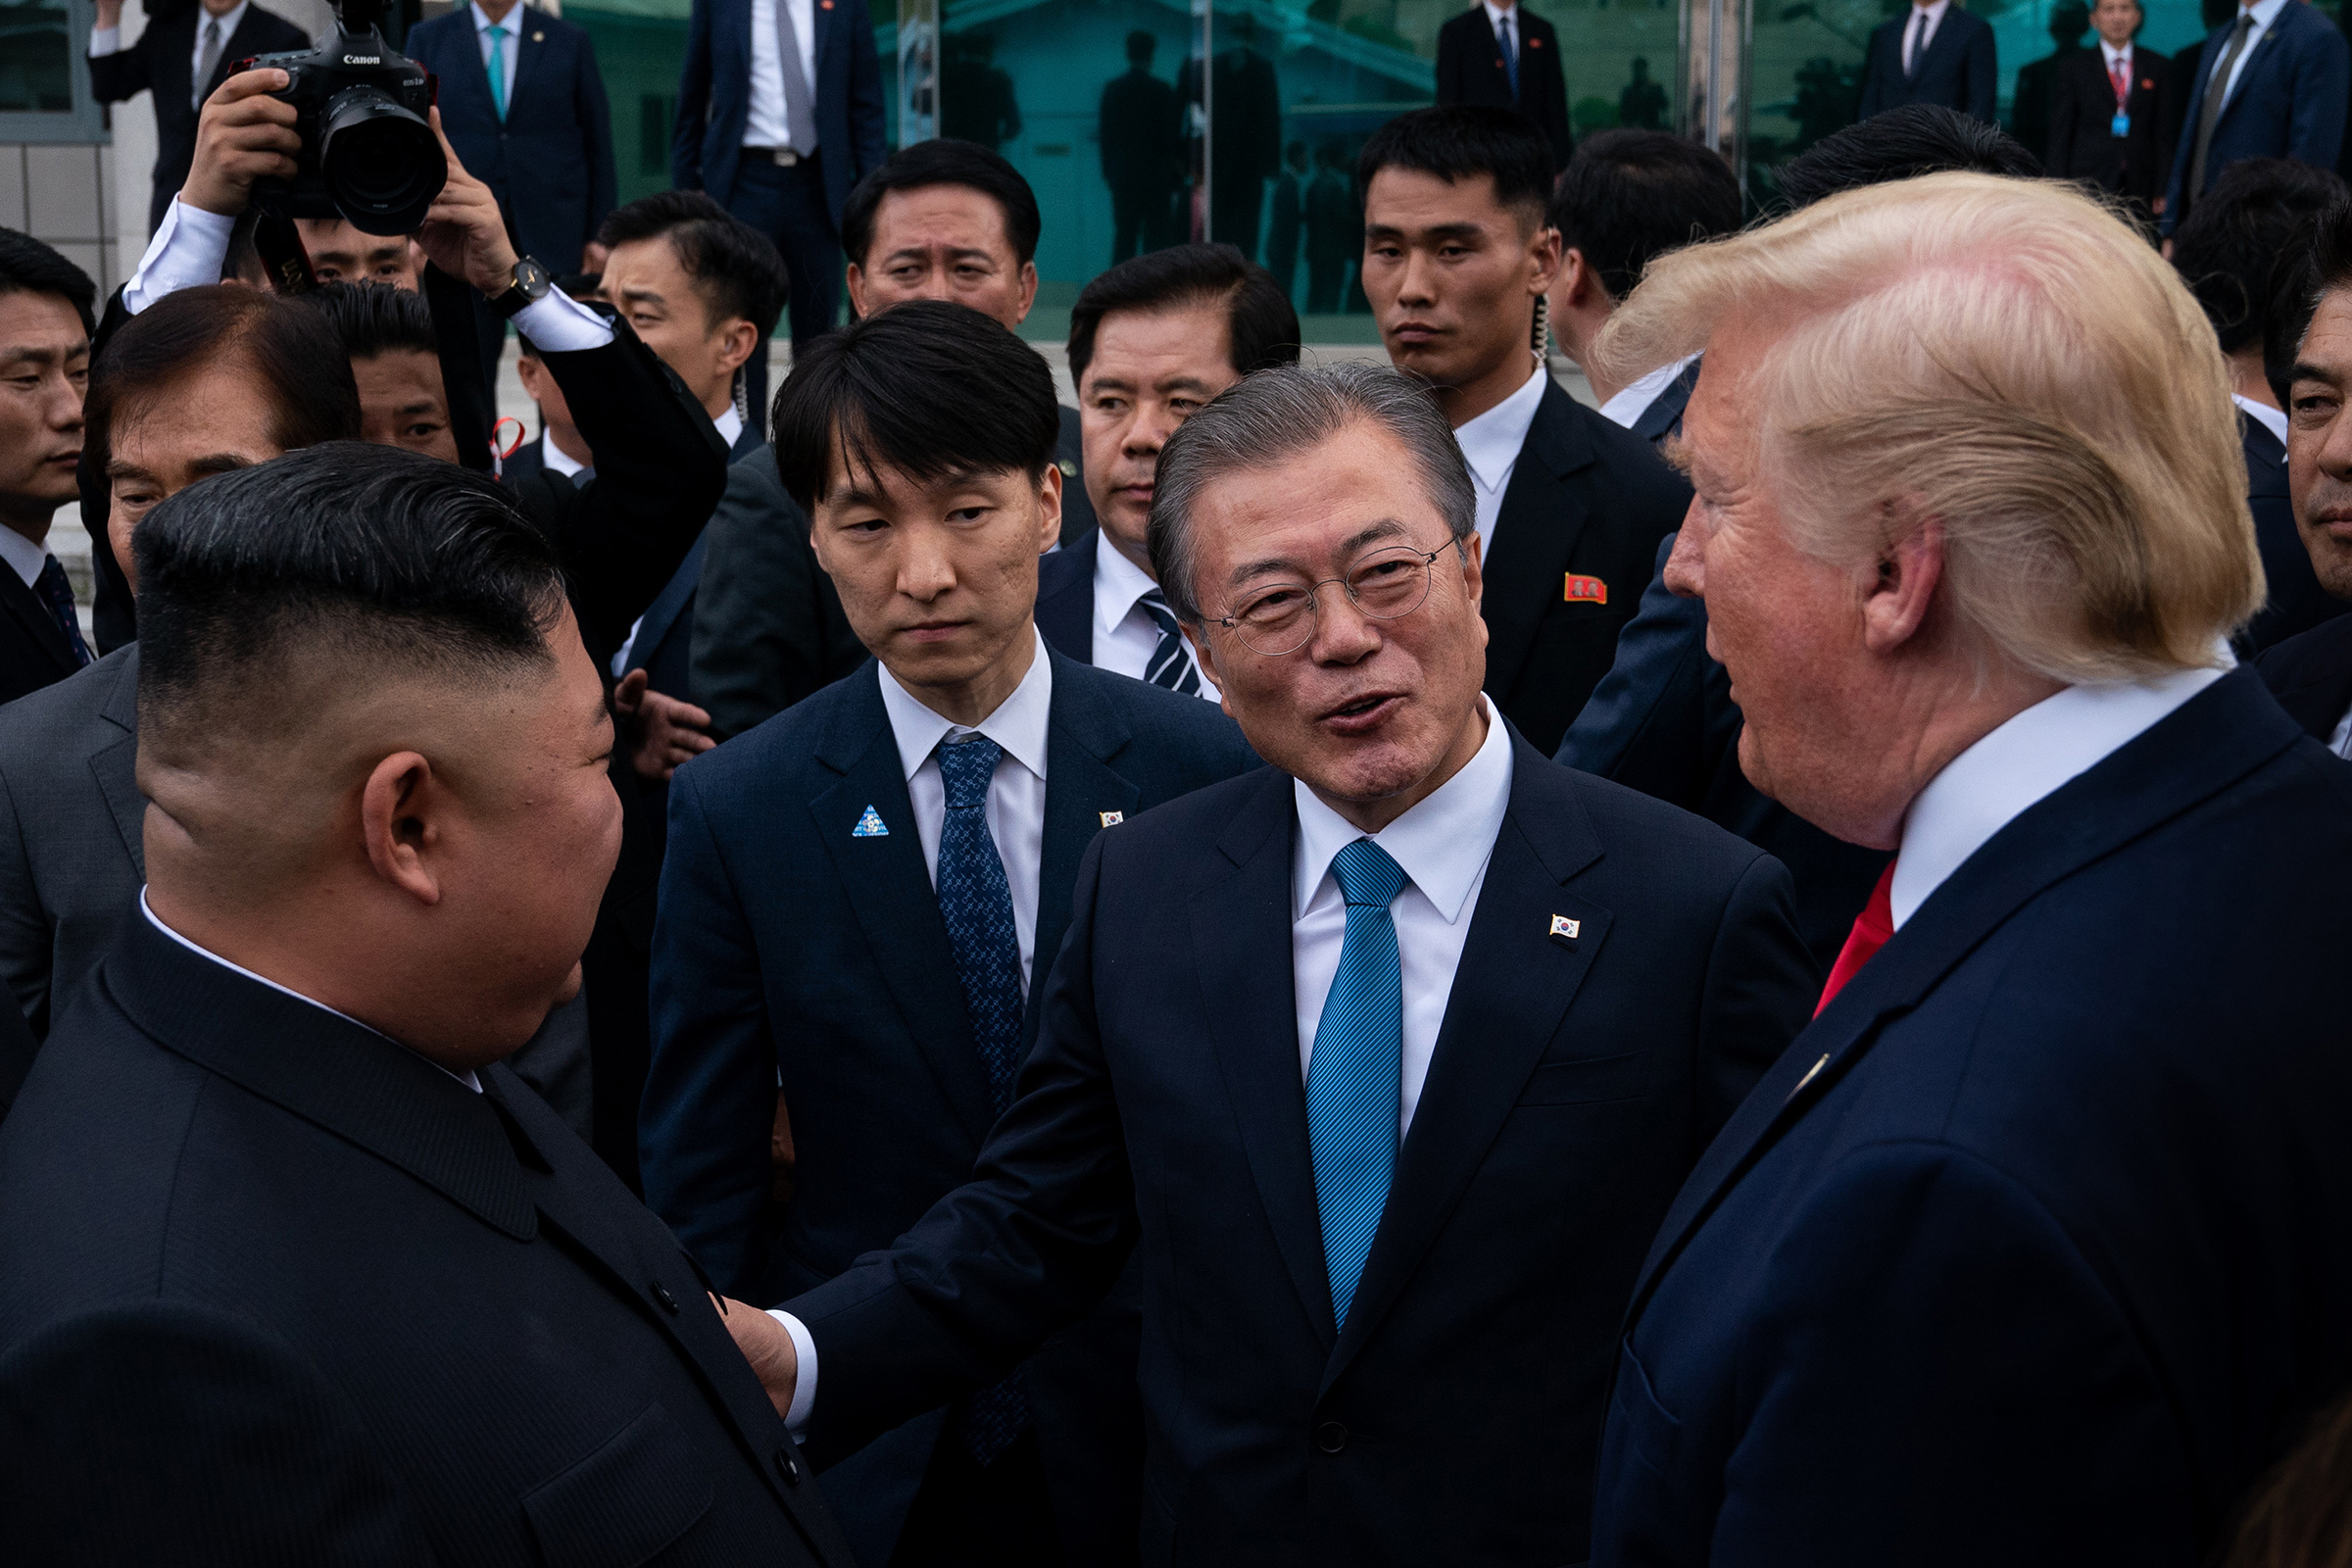 President Donald Trump, President Moon Jae-in, and Kim Jong Un speak outside the Freedom House on the South Korean side of the truce village of Panmunjom, June 30, 2019 (Erin Schaff—The New York Times/Redux)